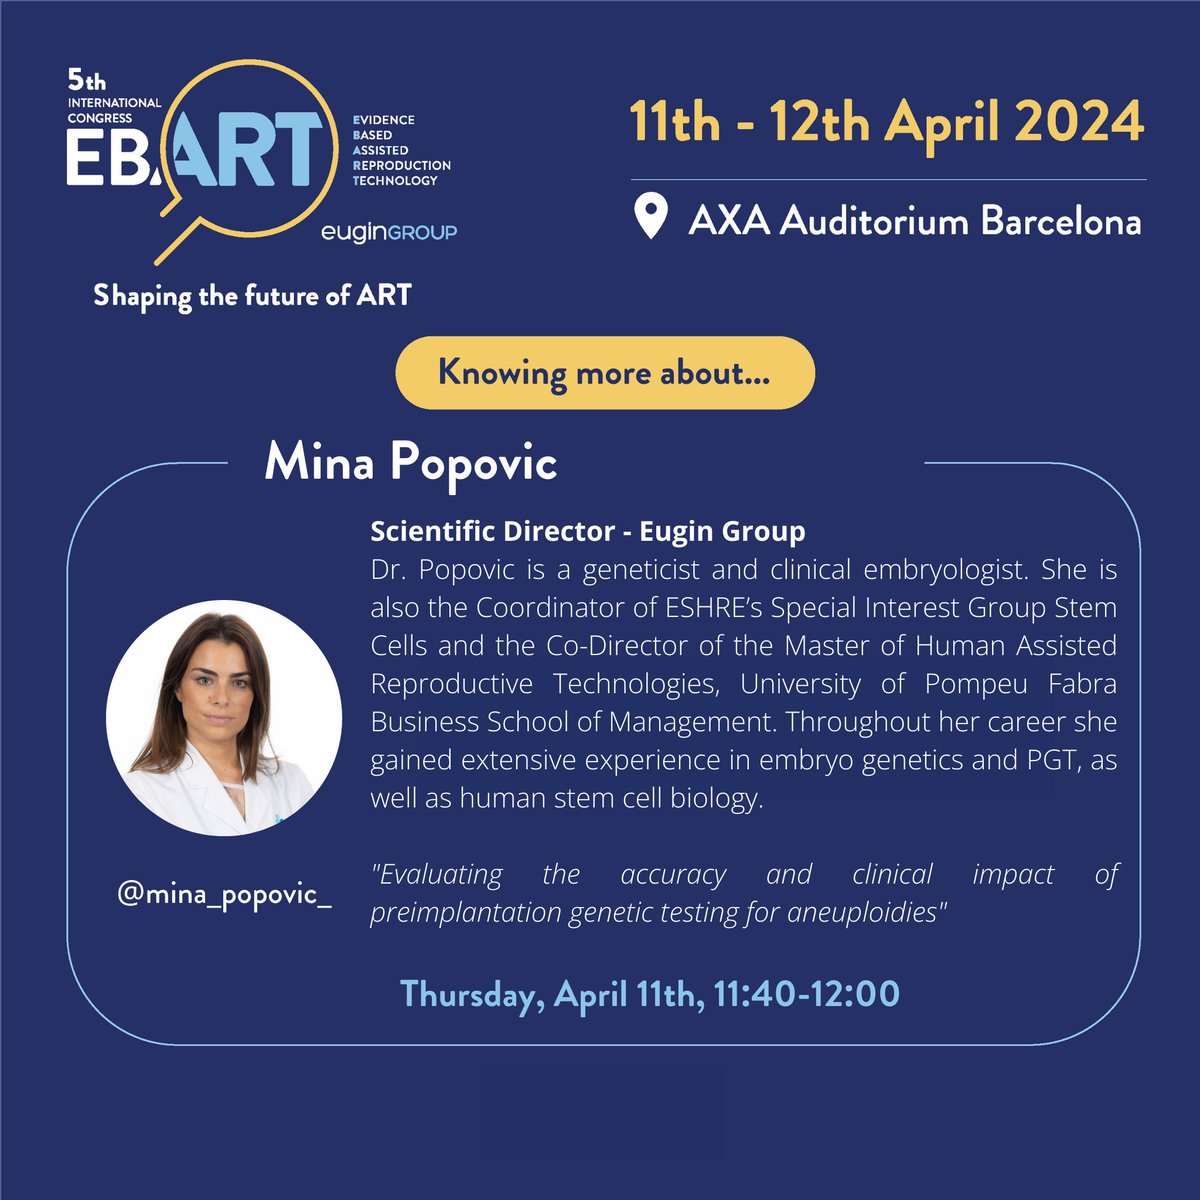 🗣Speakers #EBART2024🔬 Knowing more about Dr. Mina Popovic [@mina_popovic_]. Dr. Popovic is the Scientific Director of @Eugin_Group and co-director of #EBART2024. She also will be presenting on Thursday, 11th April🌟 find more... #science #ART #genetics